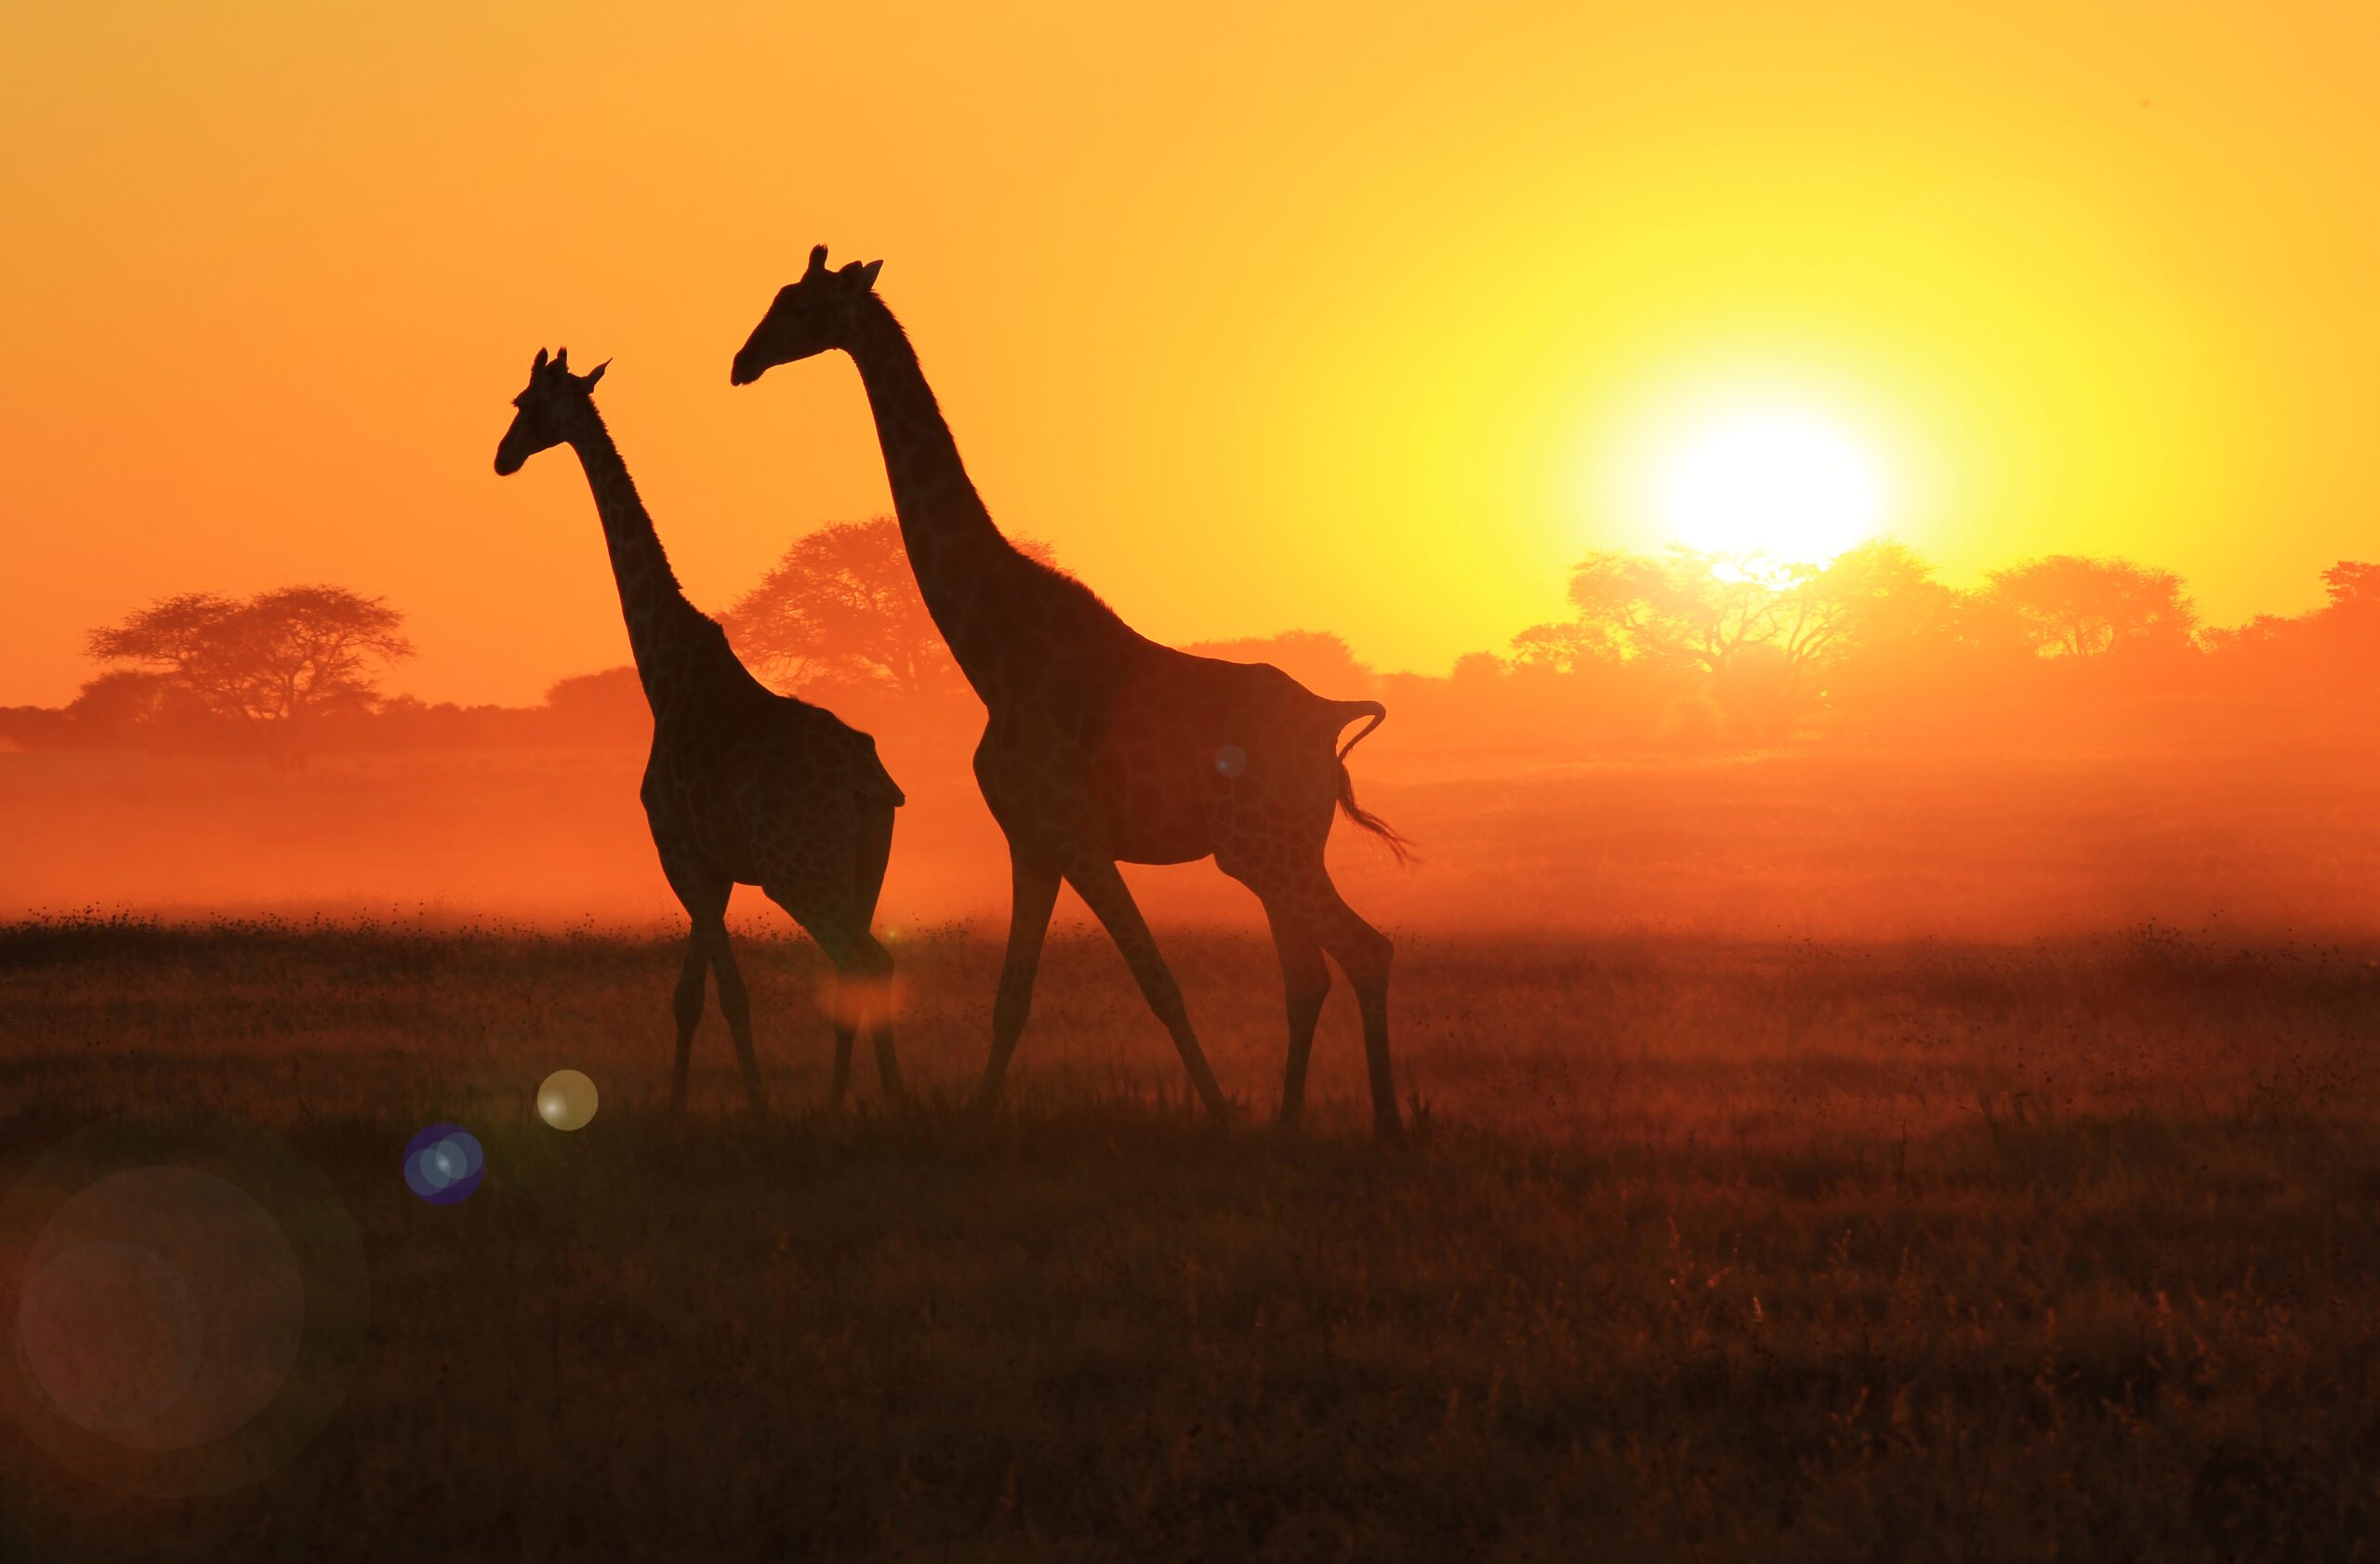 Two giraffes walk before the sunset in Africa